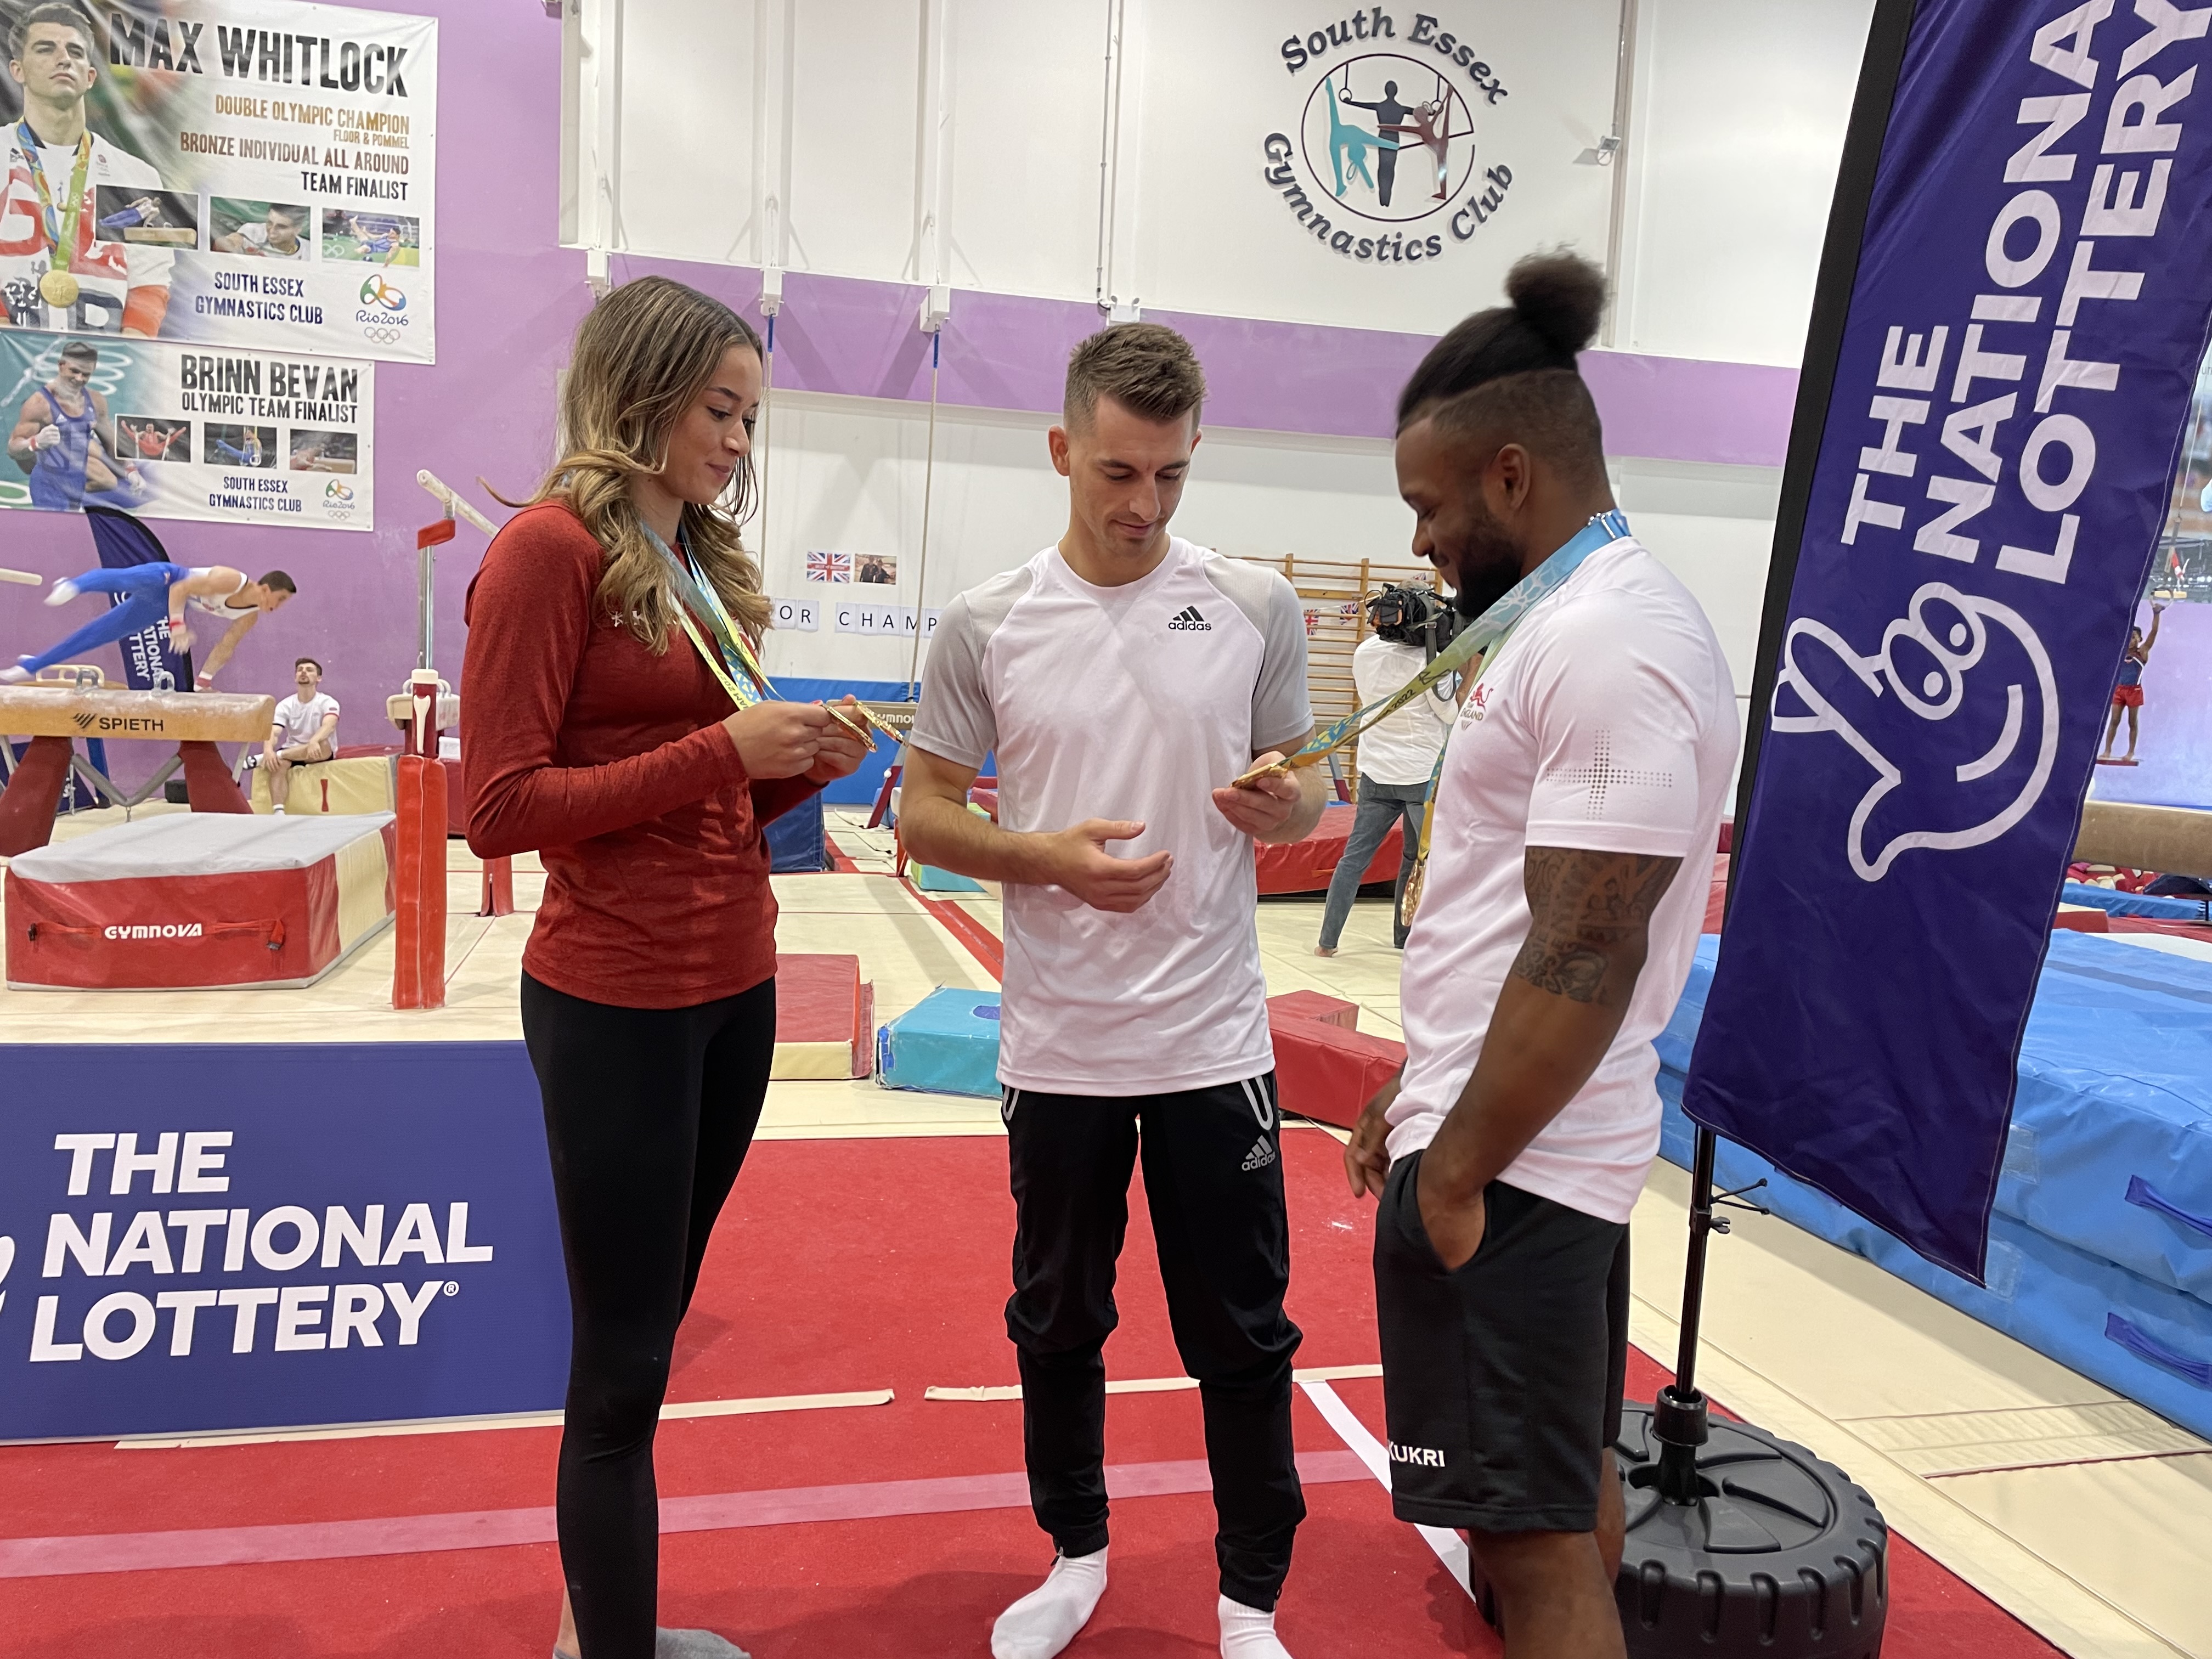 Max Whitlock was joined by England gymnasts Courtney Tulloch and Georgia-Mae Fenton as he surprised a room full of young children at his first club, South Essex Gymnastics Club. 